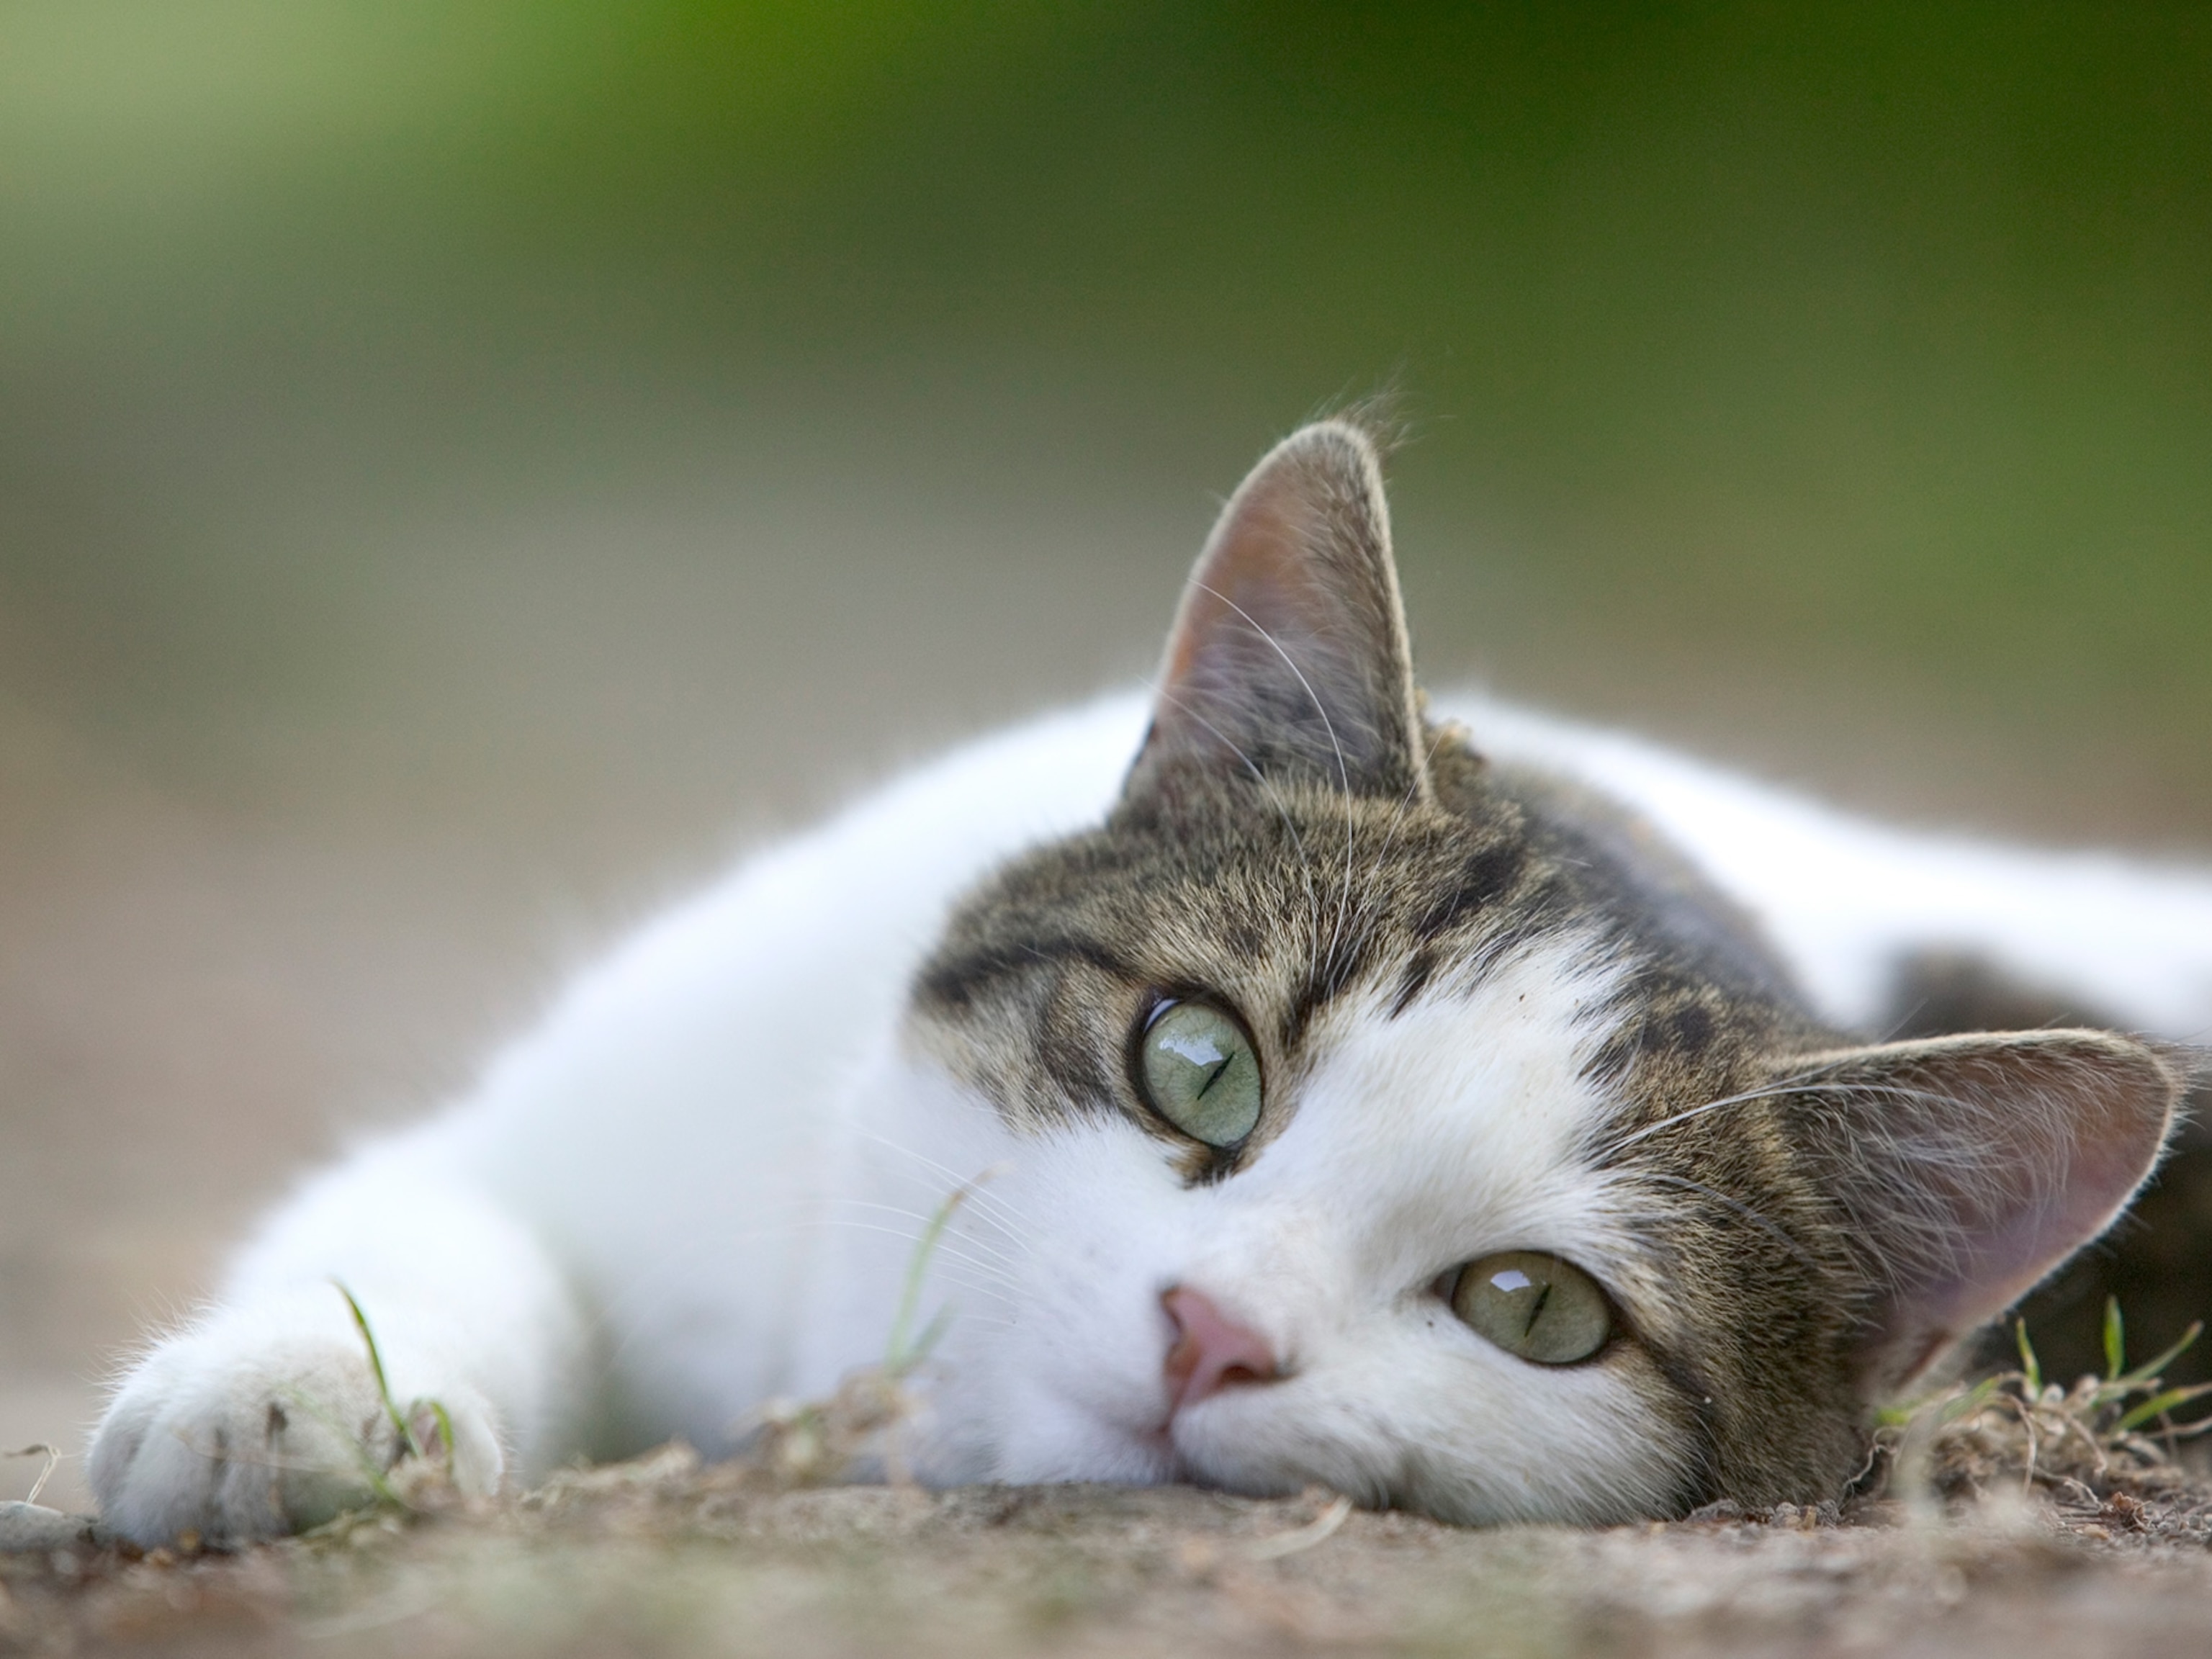 Here's why cats hate belly rubs so much